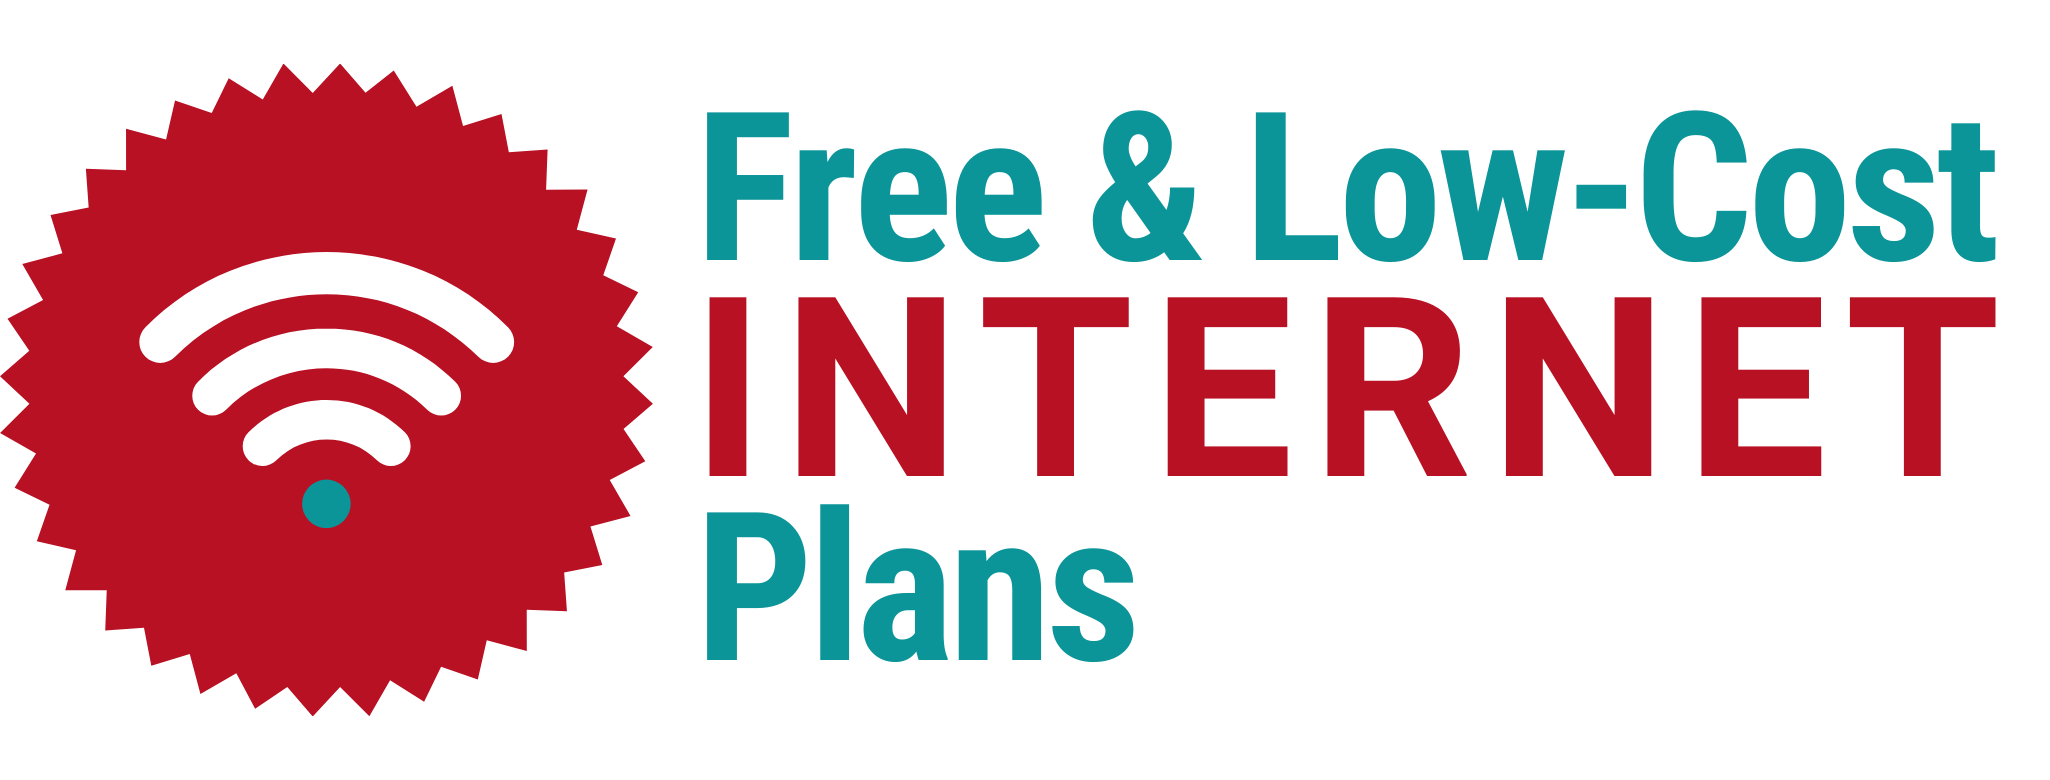 Free or LowCost and Free Unlimited Data, Texts (plus